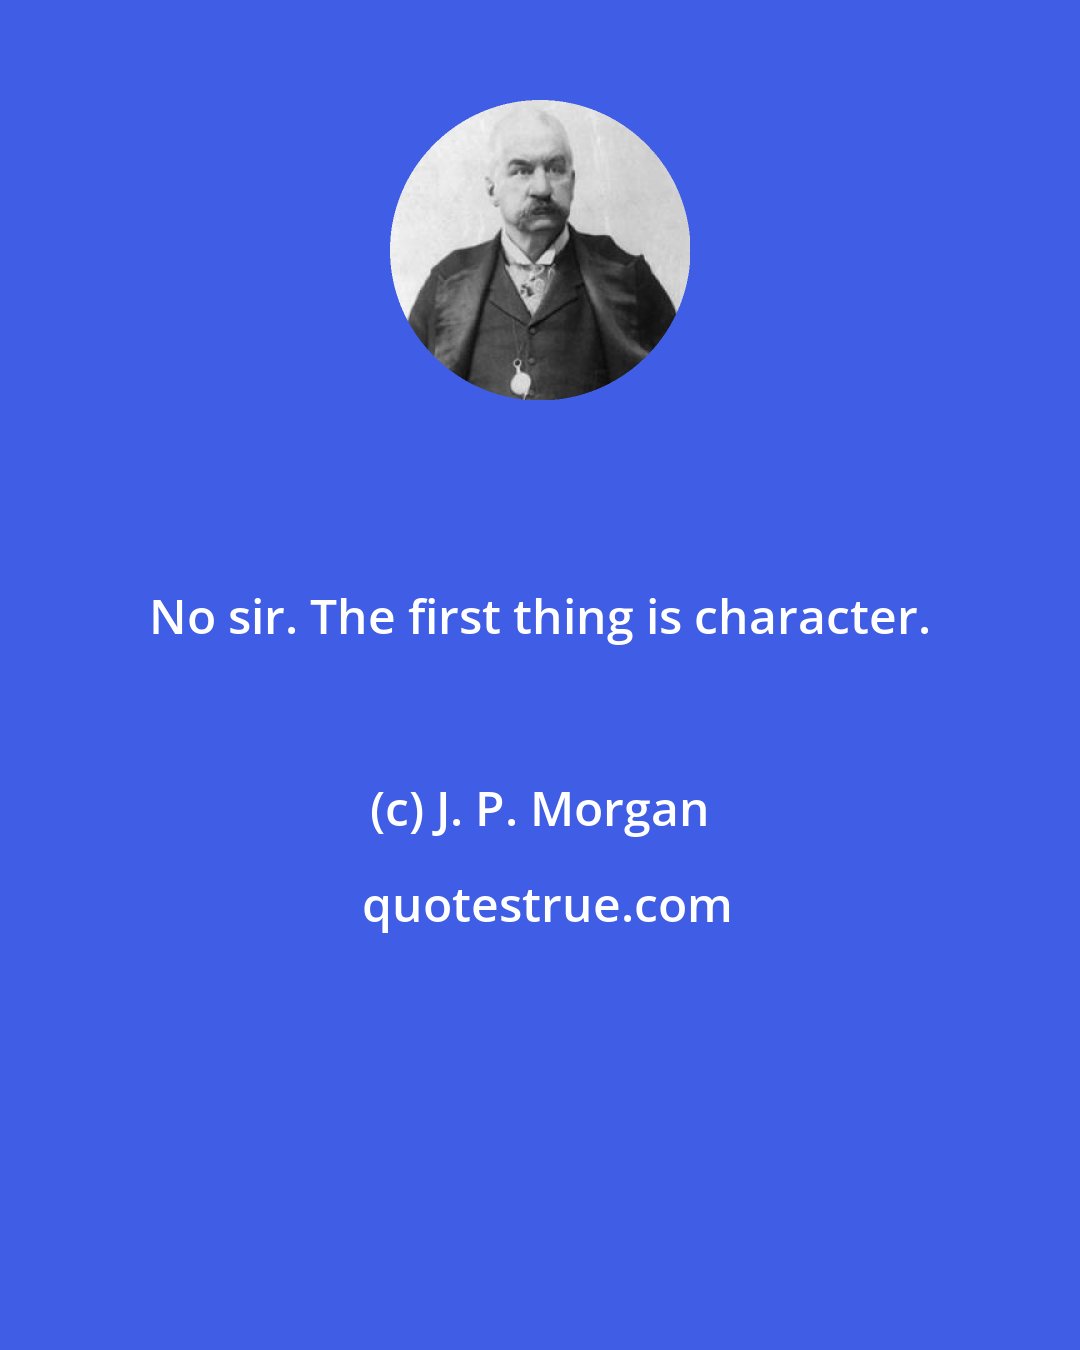 J. P. Morgan: No sir. The first thing is character.